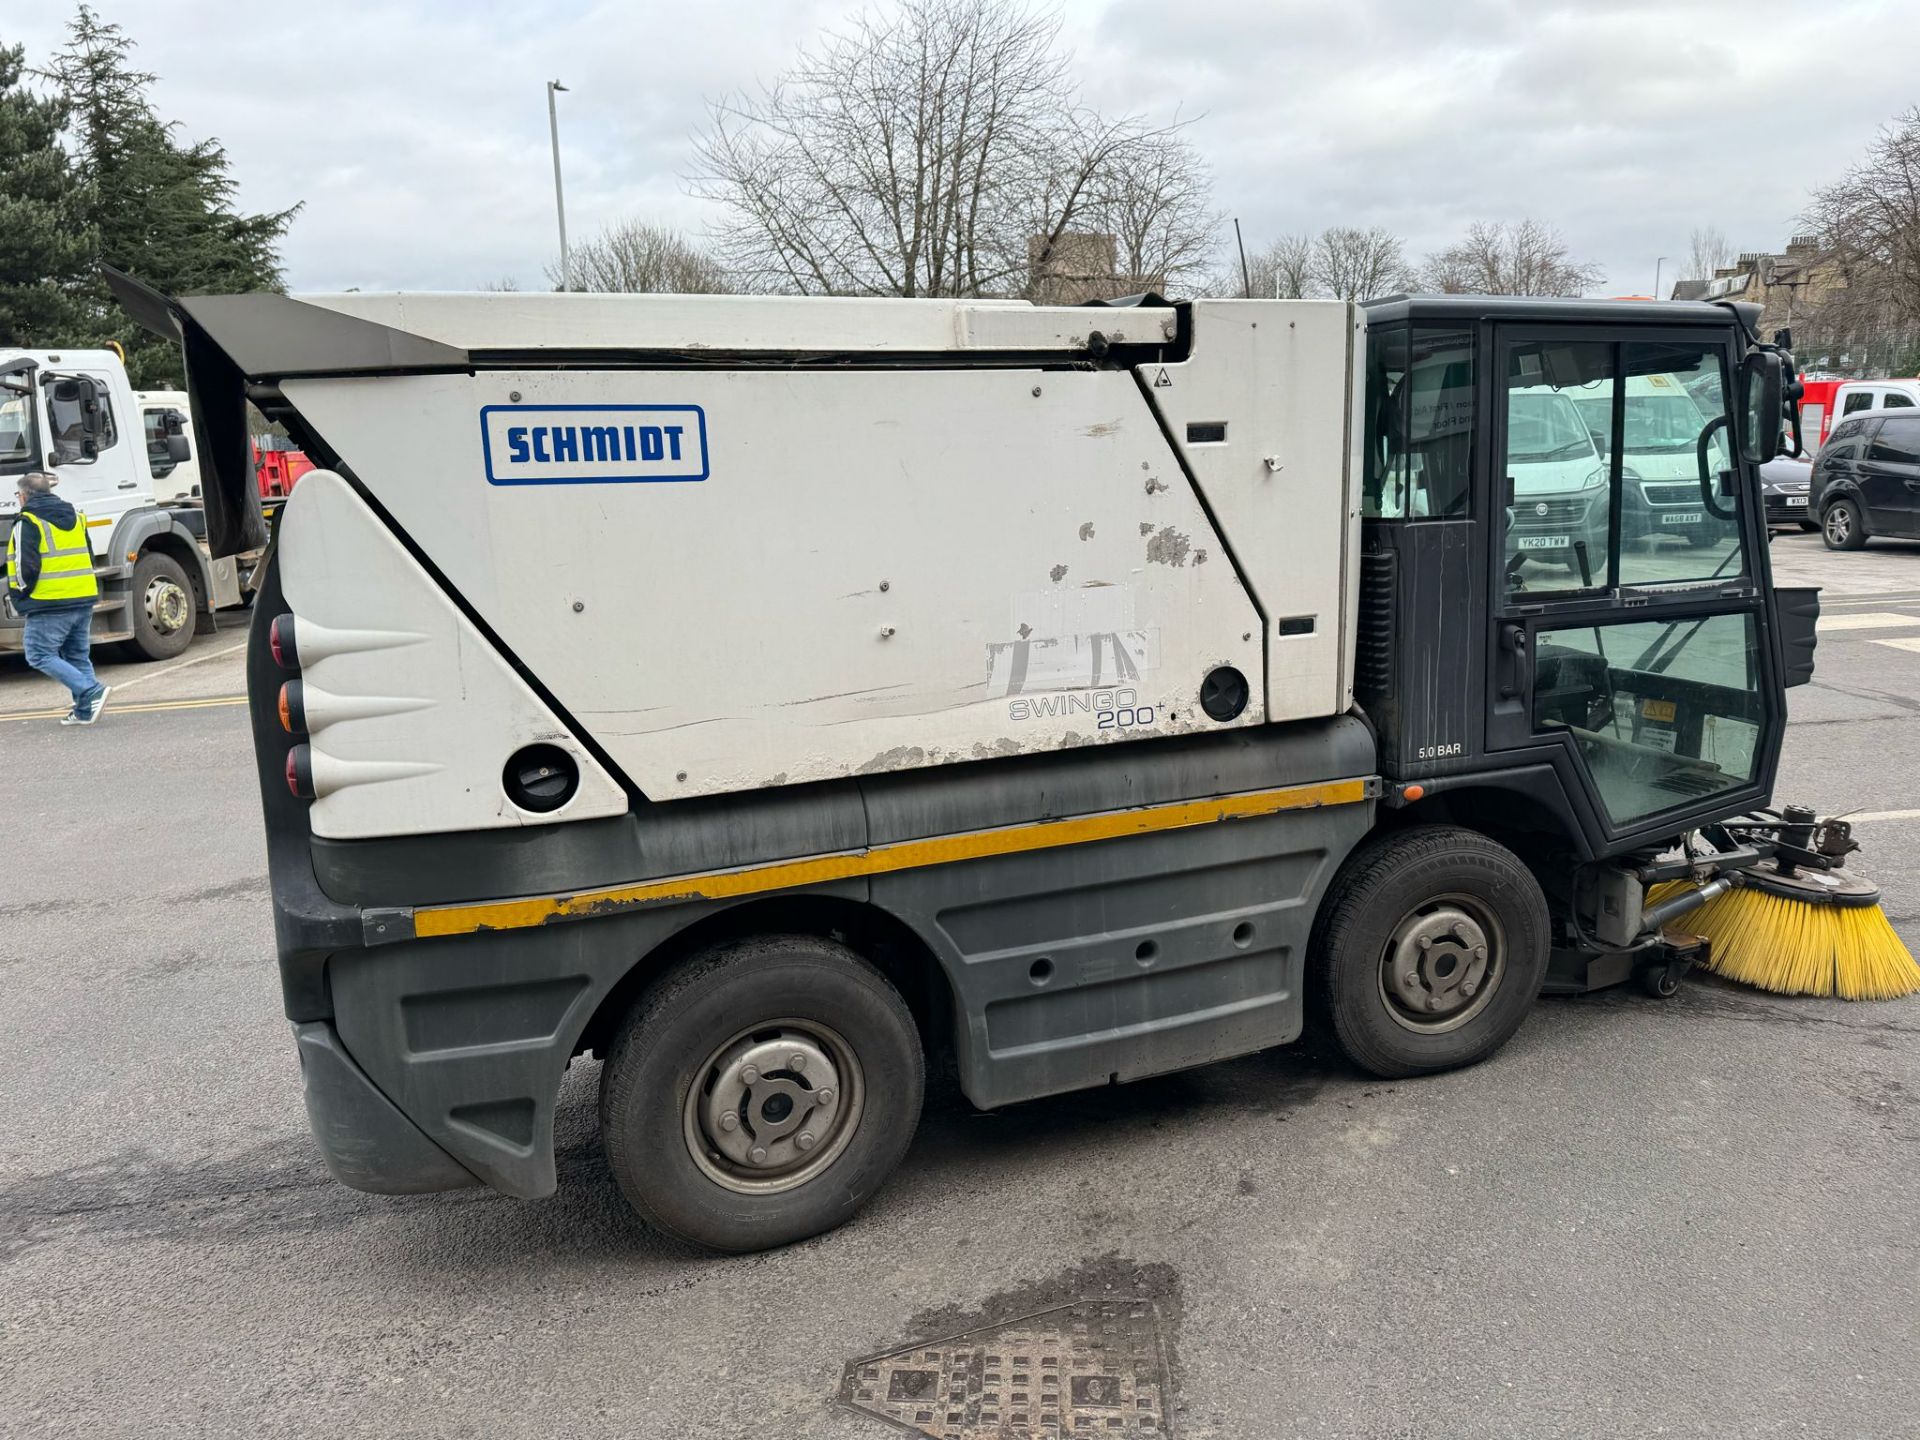 2017, SCHMIDT - Compact 200 Road Sweeper (Ex-Council fleet owned and maintained) - Image 7 of 32